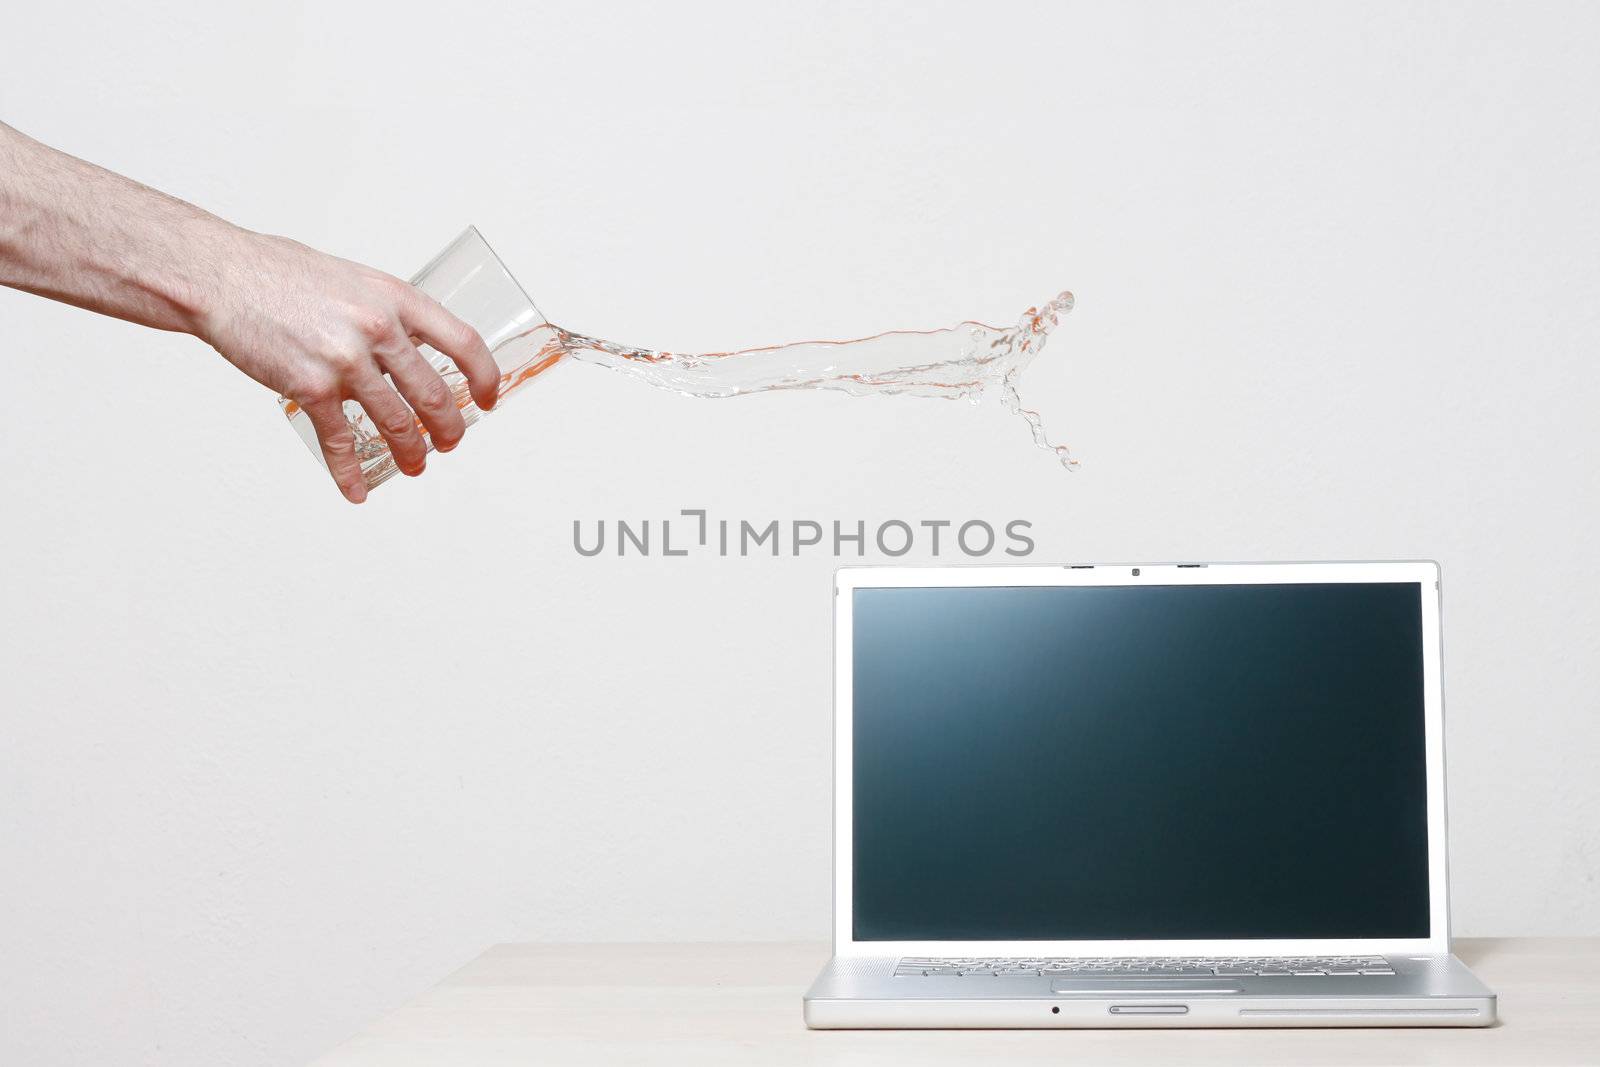 Man accidentally pouring water on laptop